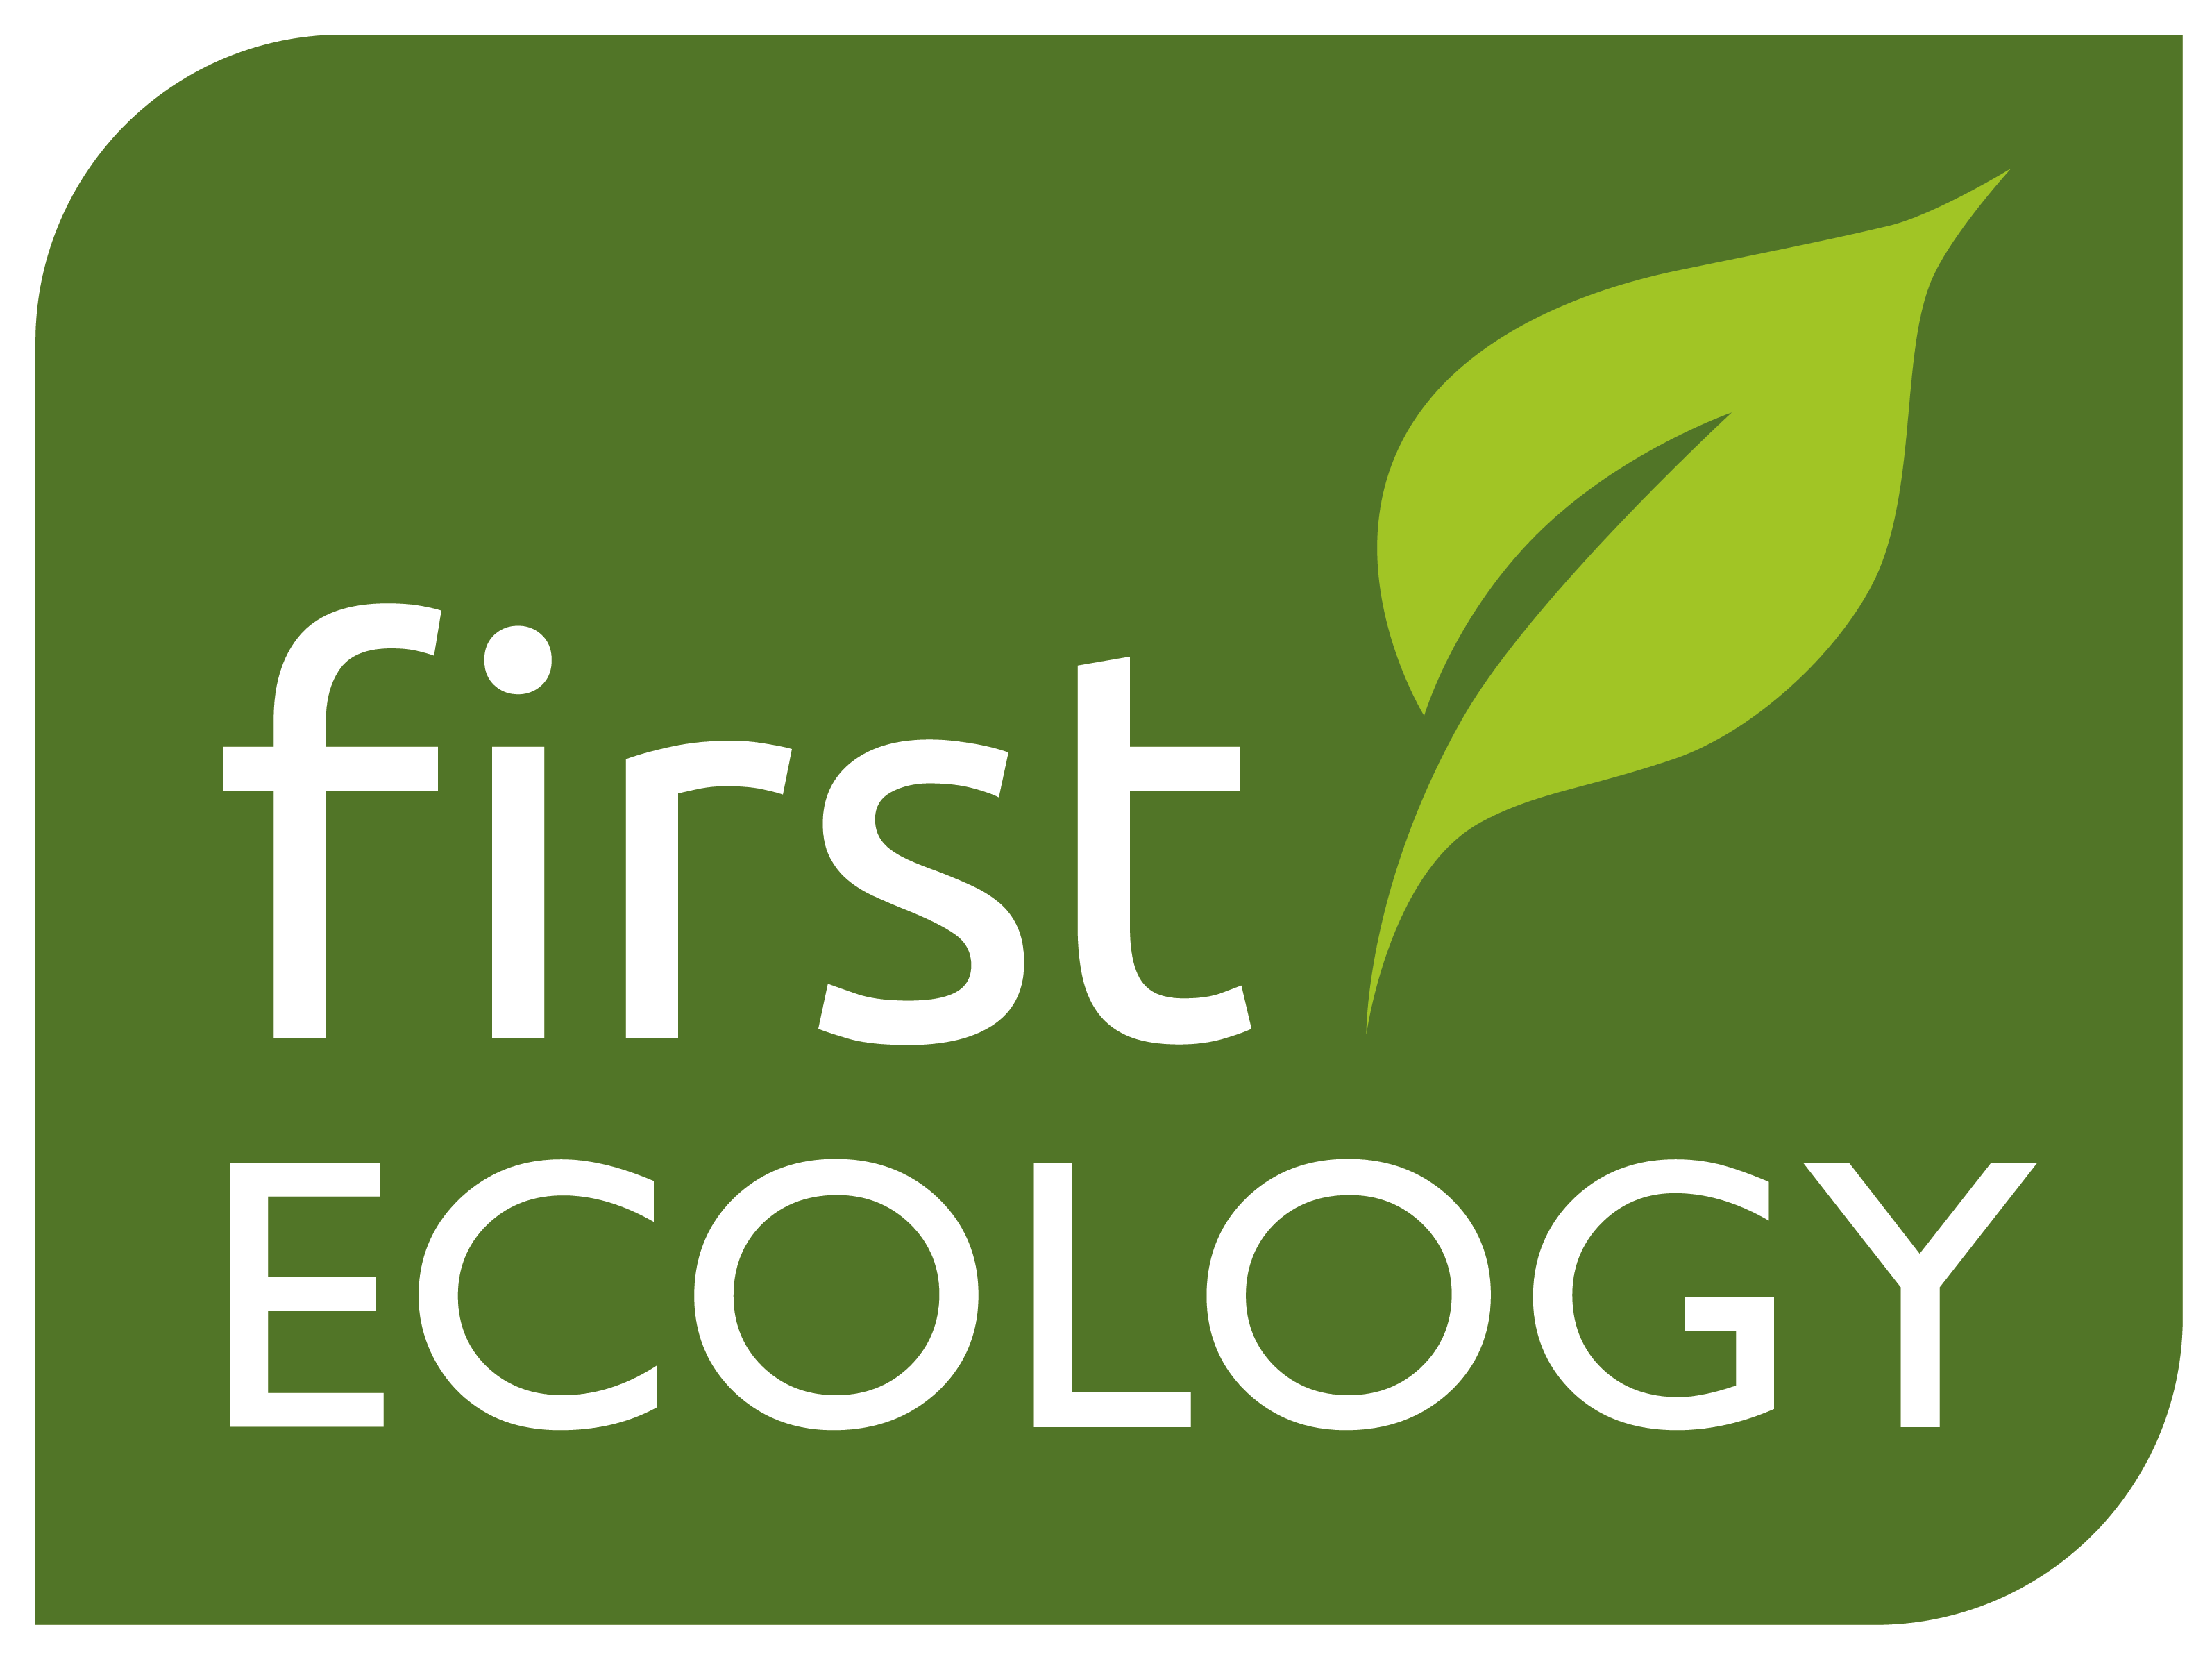 First Ecology